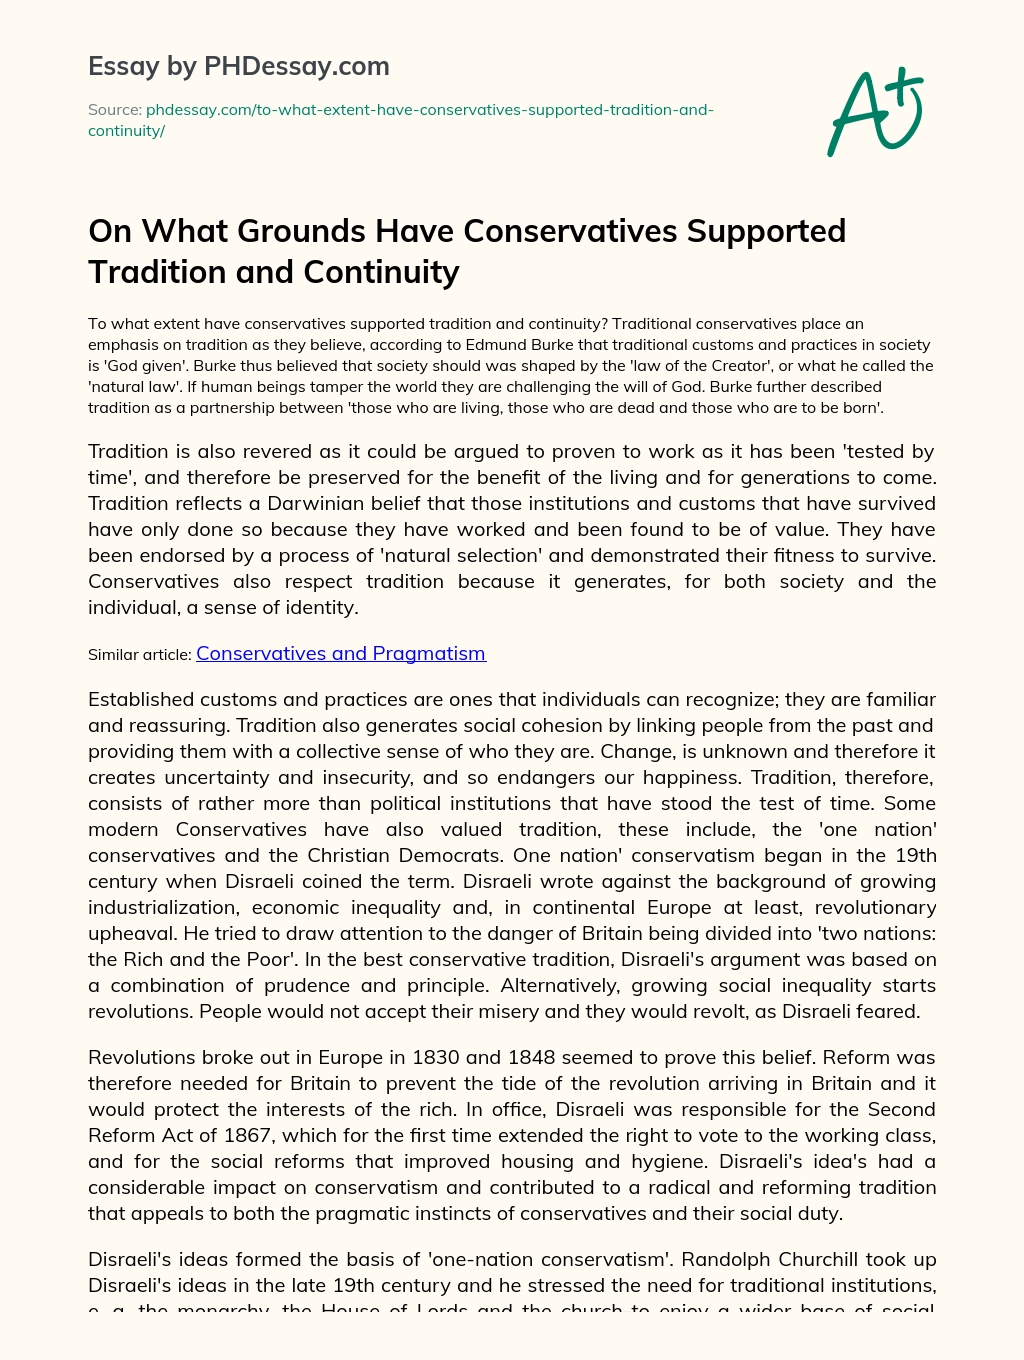 On What Grounds Have Conservatives Supported Tradition and Continuity essay